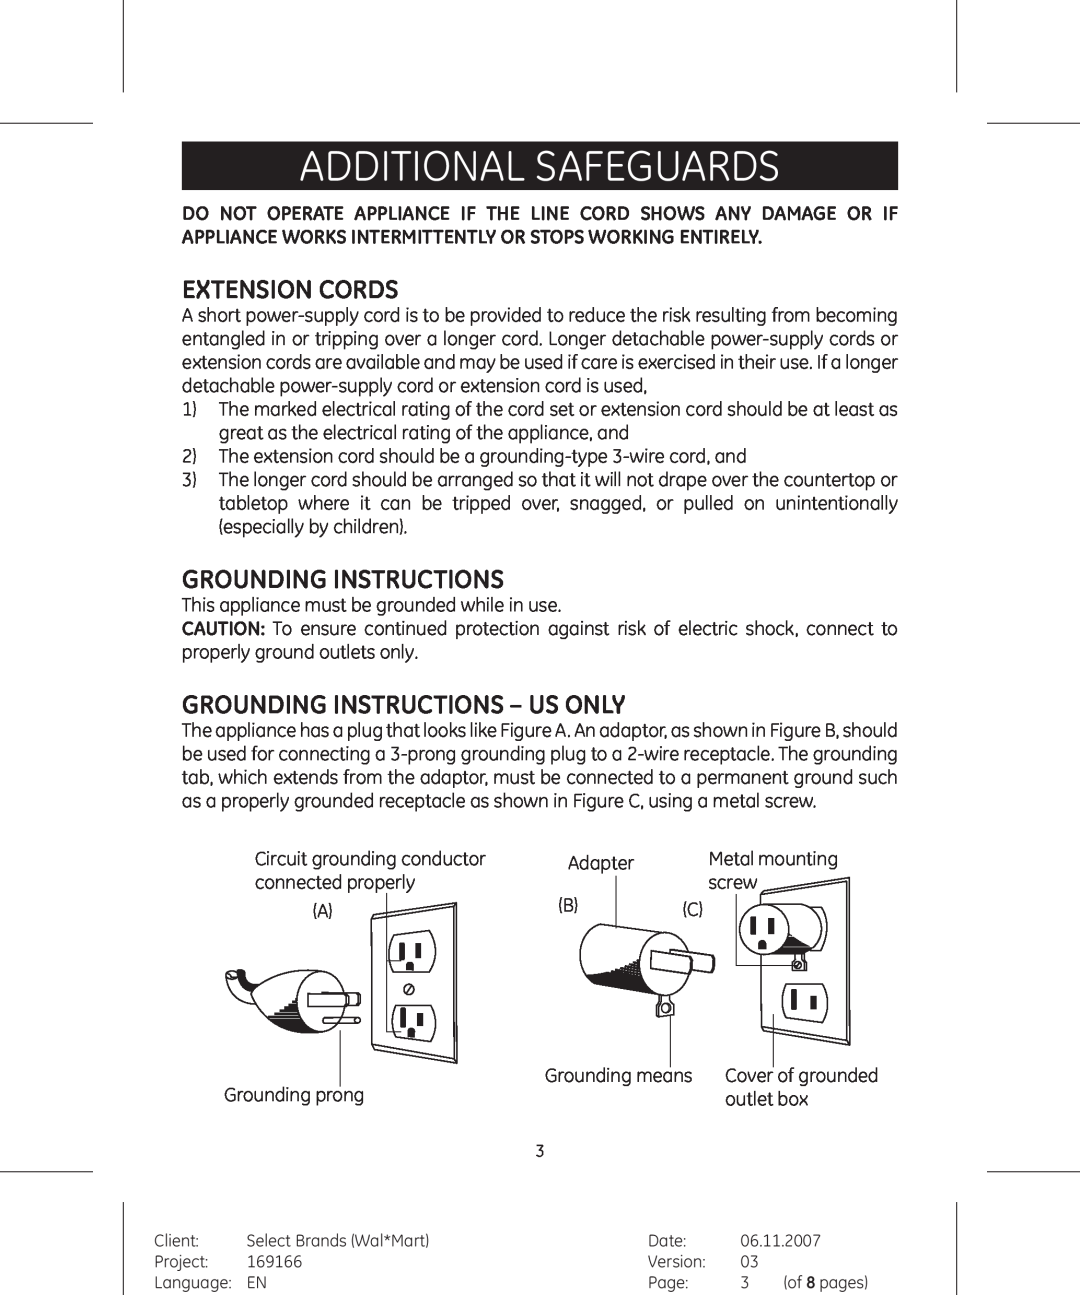 GE 681131691666 manual Additional Safeguards, Extension Cords, Grounding Instructions - Us Only 